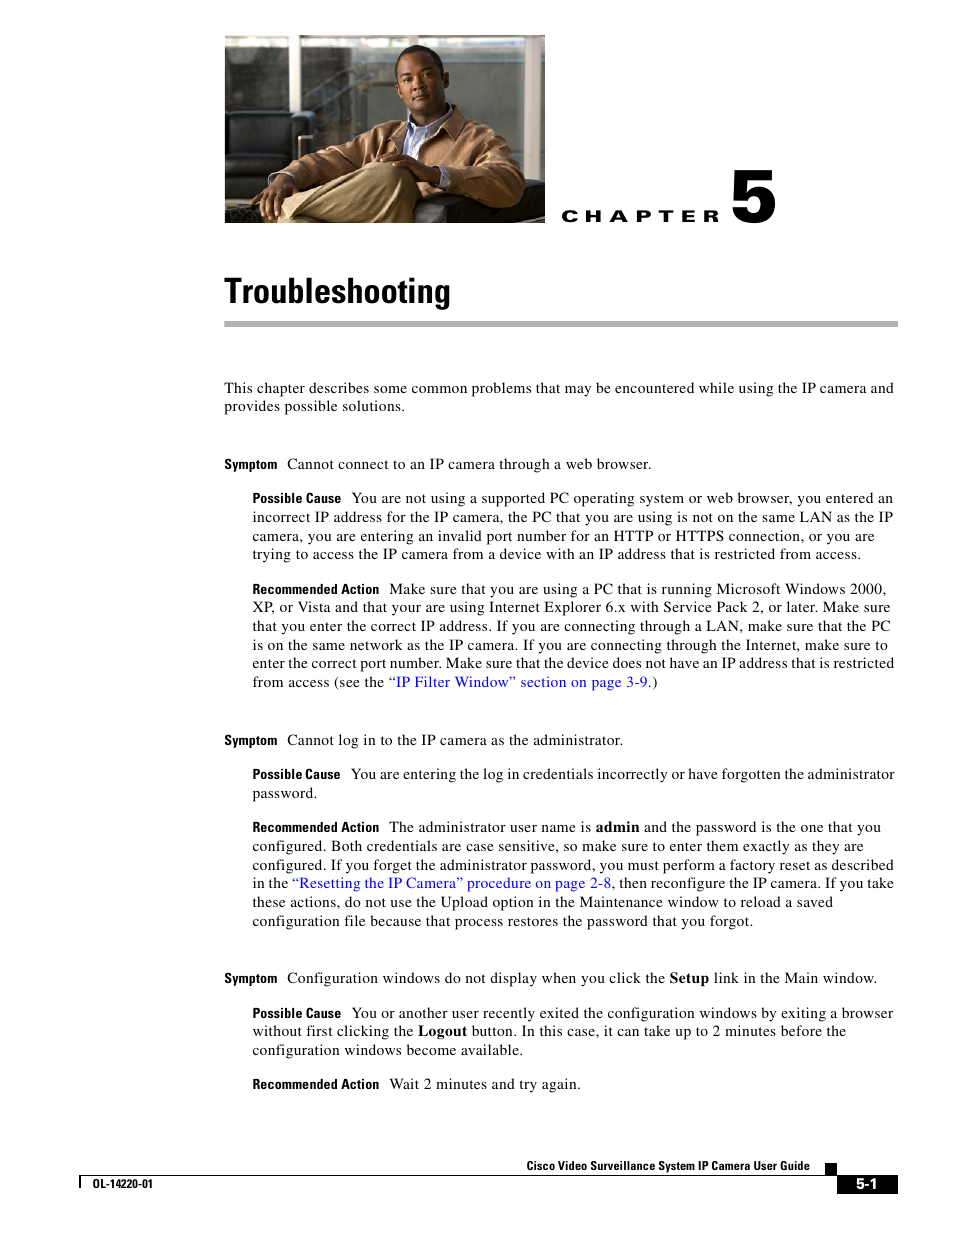 Troubleshooting, C h a p t e r, Chapter 5, “troubleshooting | Cisco CIVS-IPC-2500 User Manual | Page 67 / 82